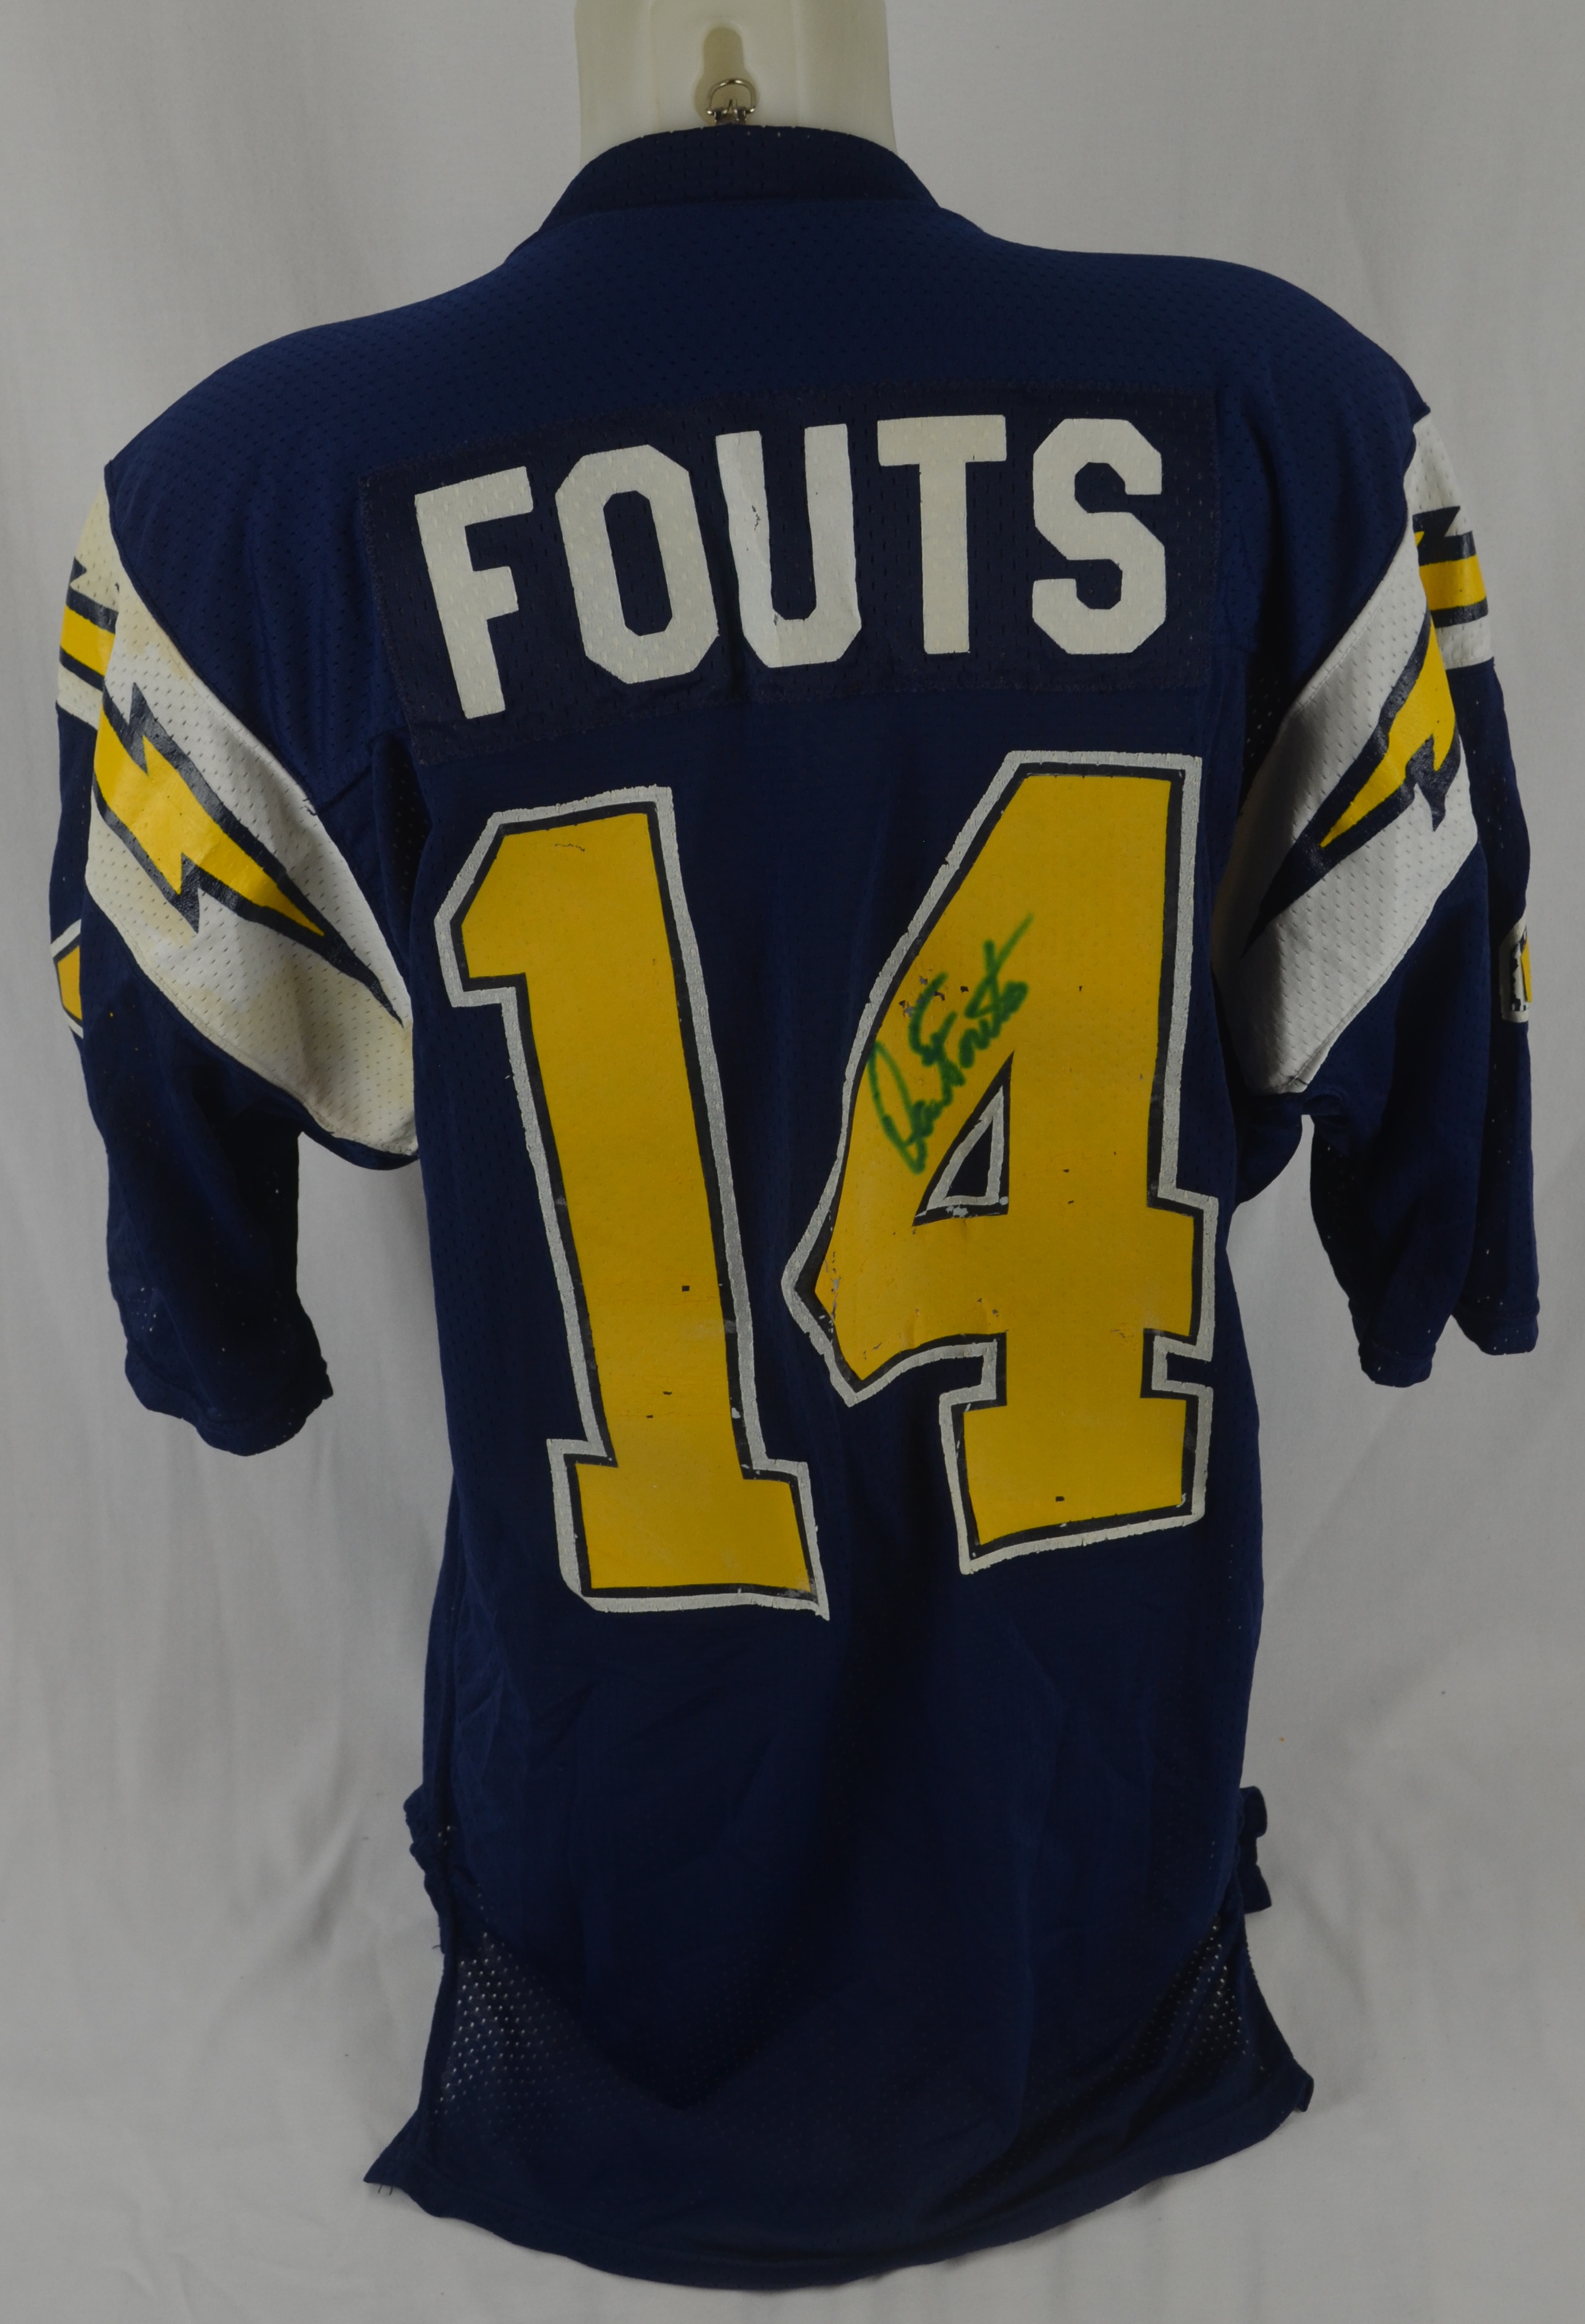 dan fouts jersey signed